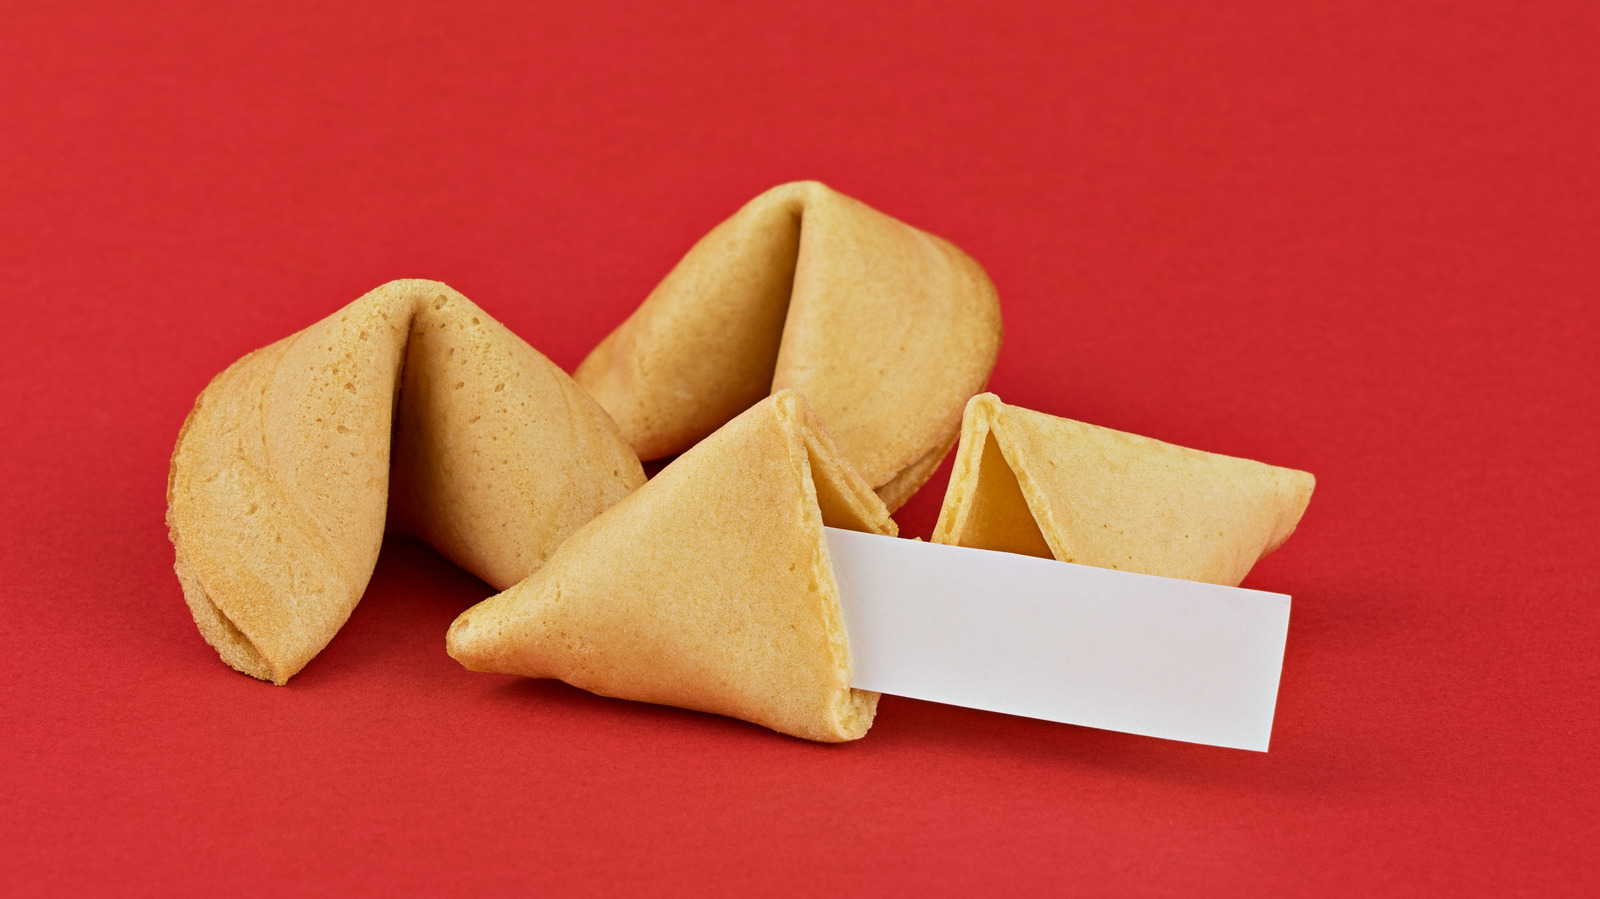 The Surprising Origins of the Fortune Cookie